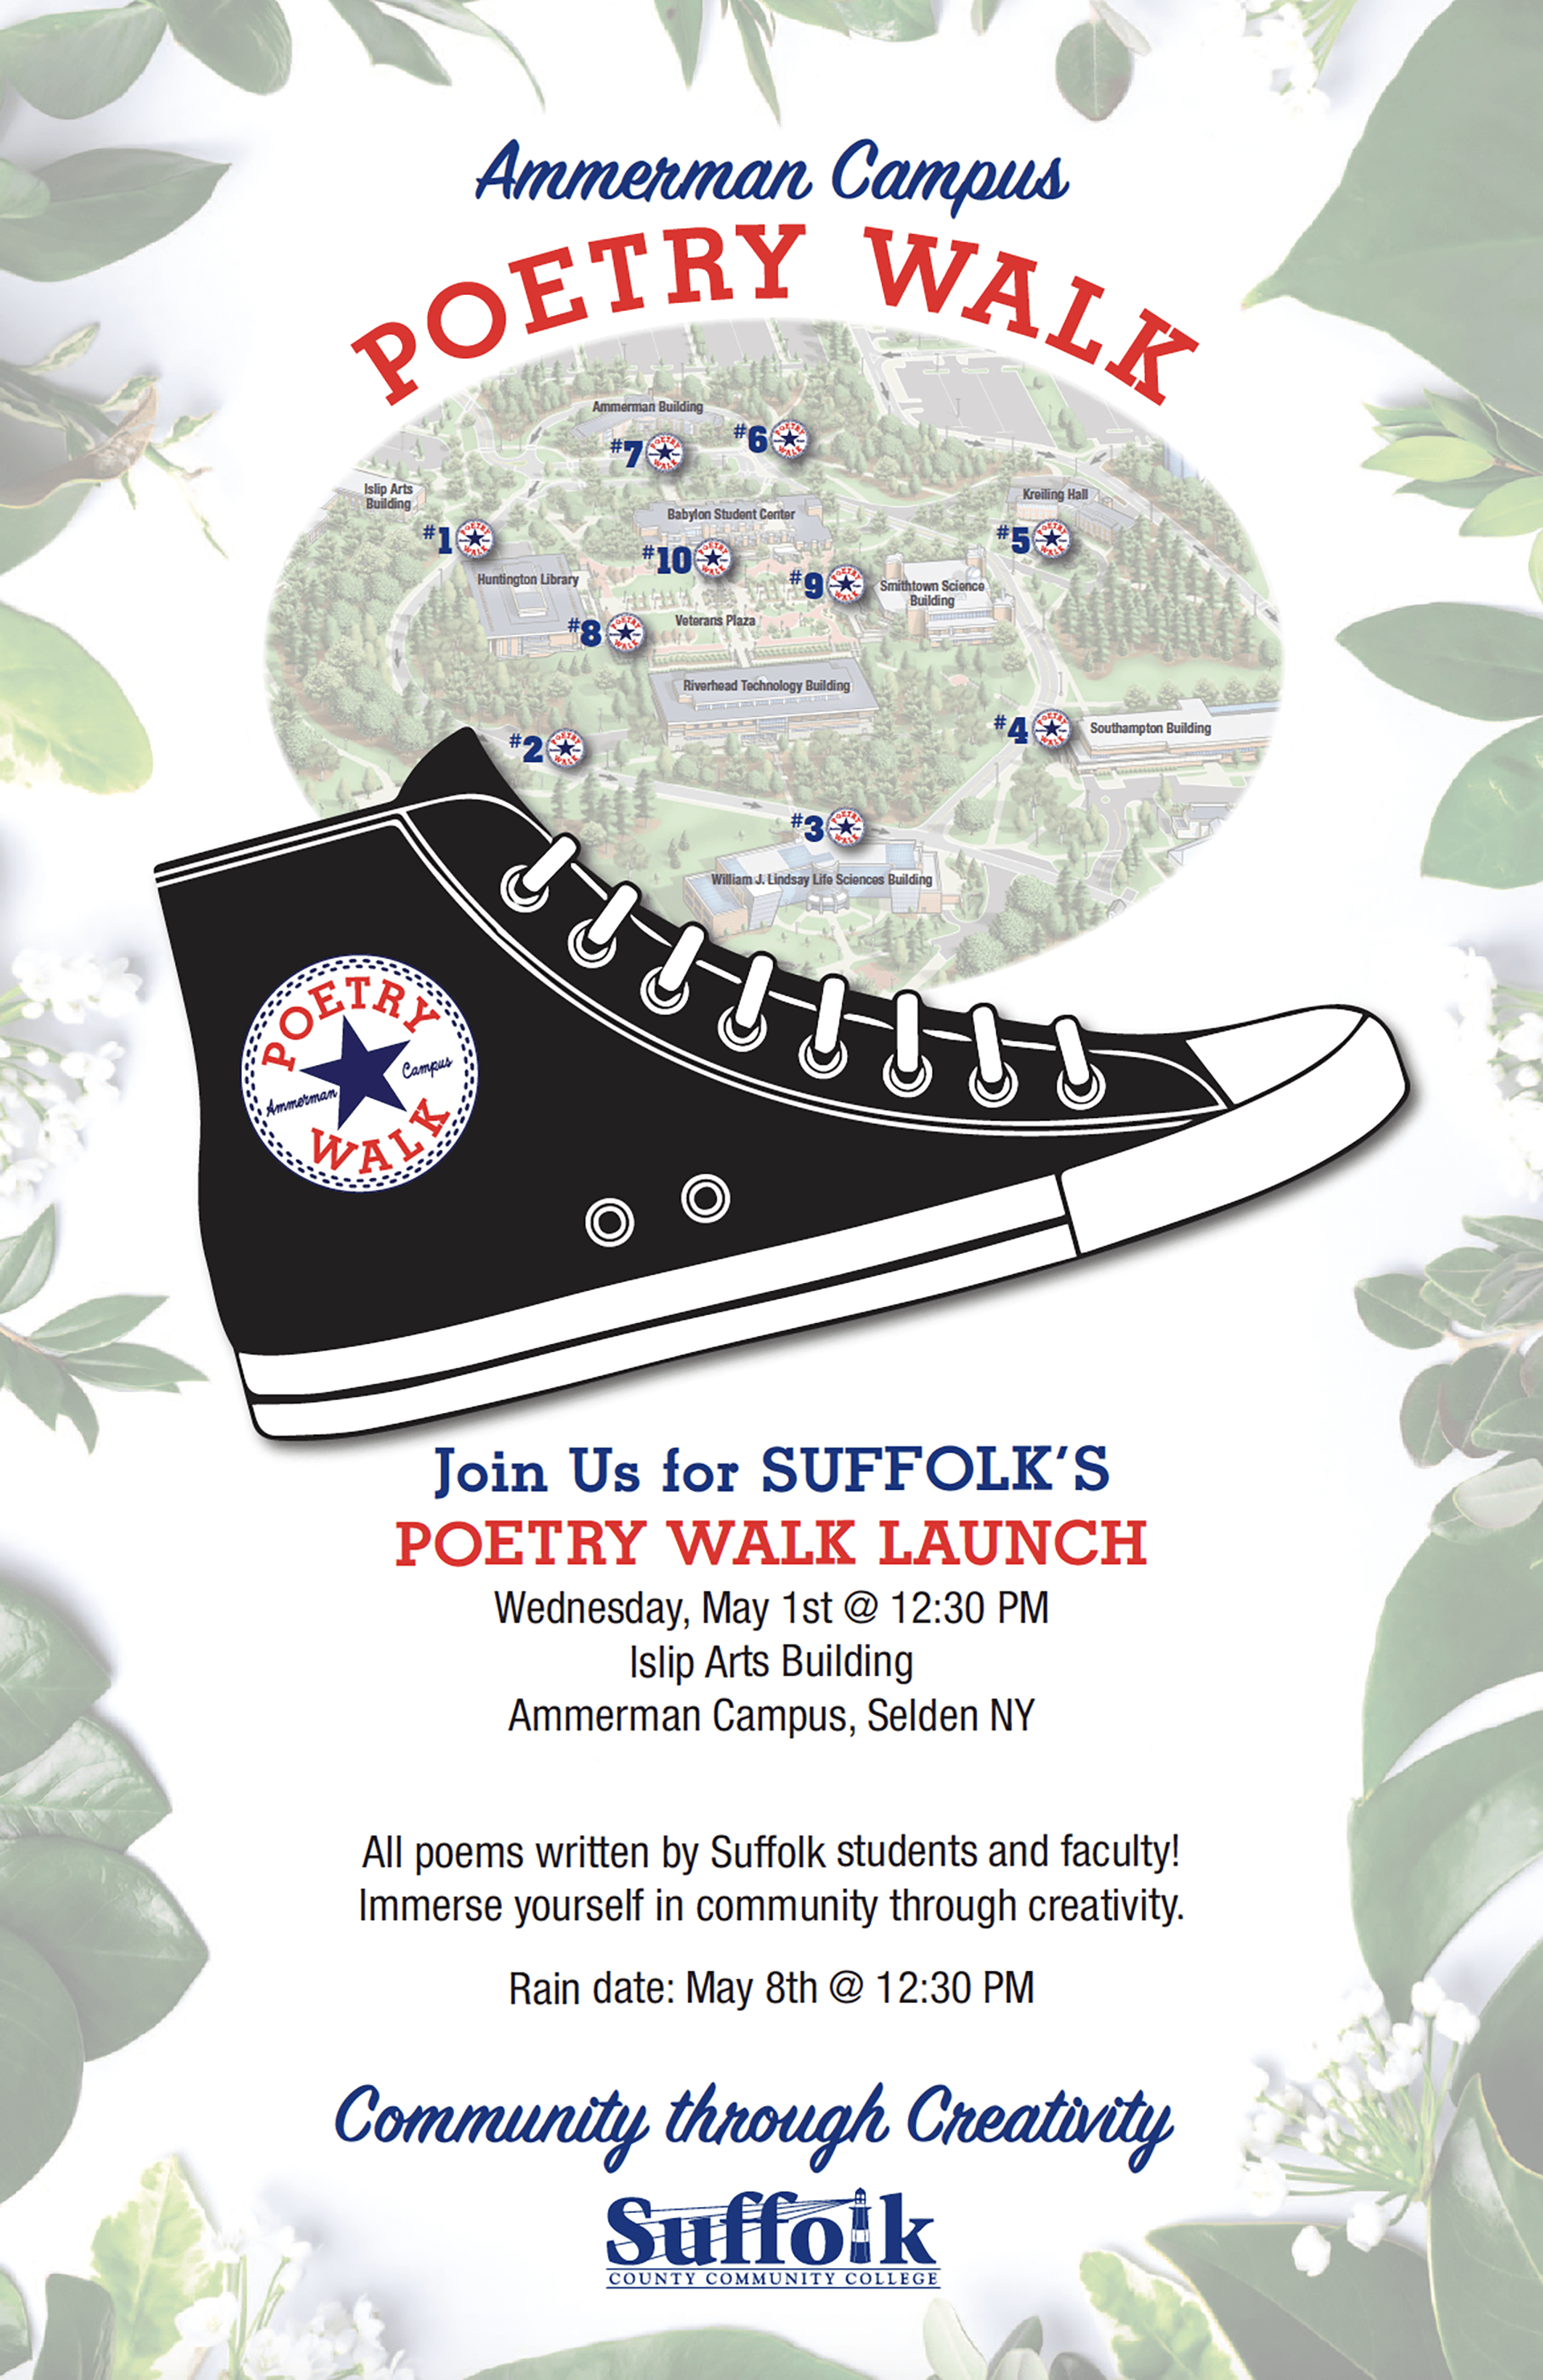 Join us for Suffolk's Poetry Walk Launch Wednesday, May 1st at 12:30 PM at the Islip Arts Building, Ammerman Campus, Selden, NY. All poems written by ýstudents and faculty! Immerse yourself in community through creativity. Rain date: May 8th at 12:30 p.m.